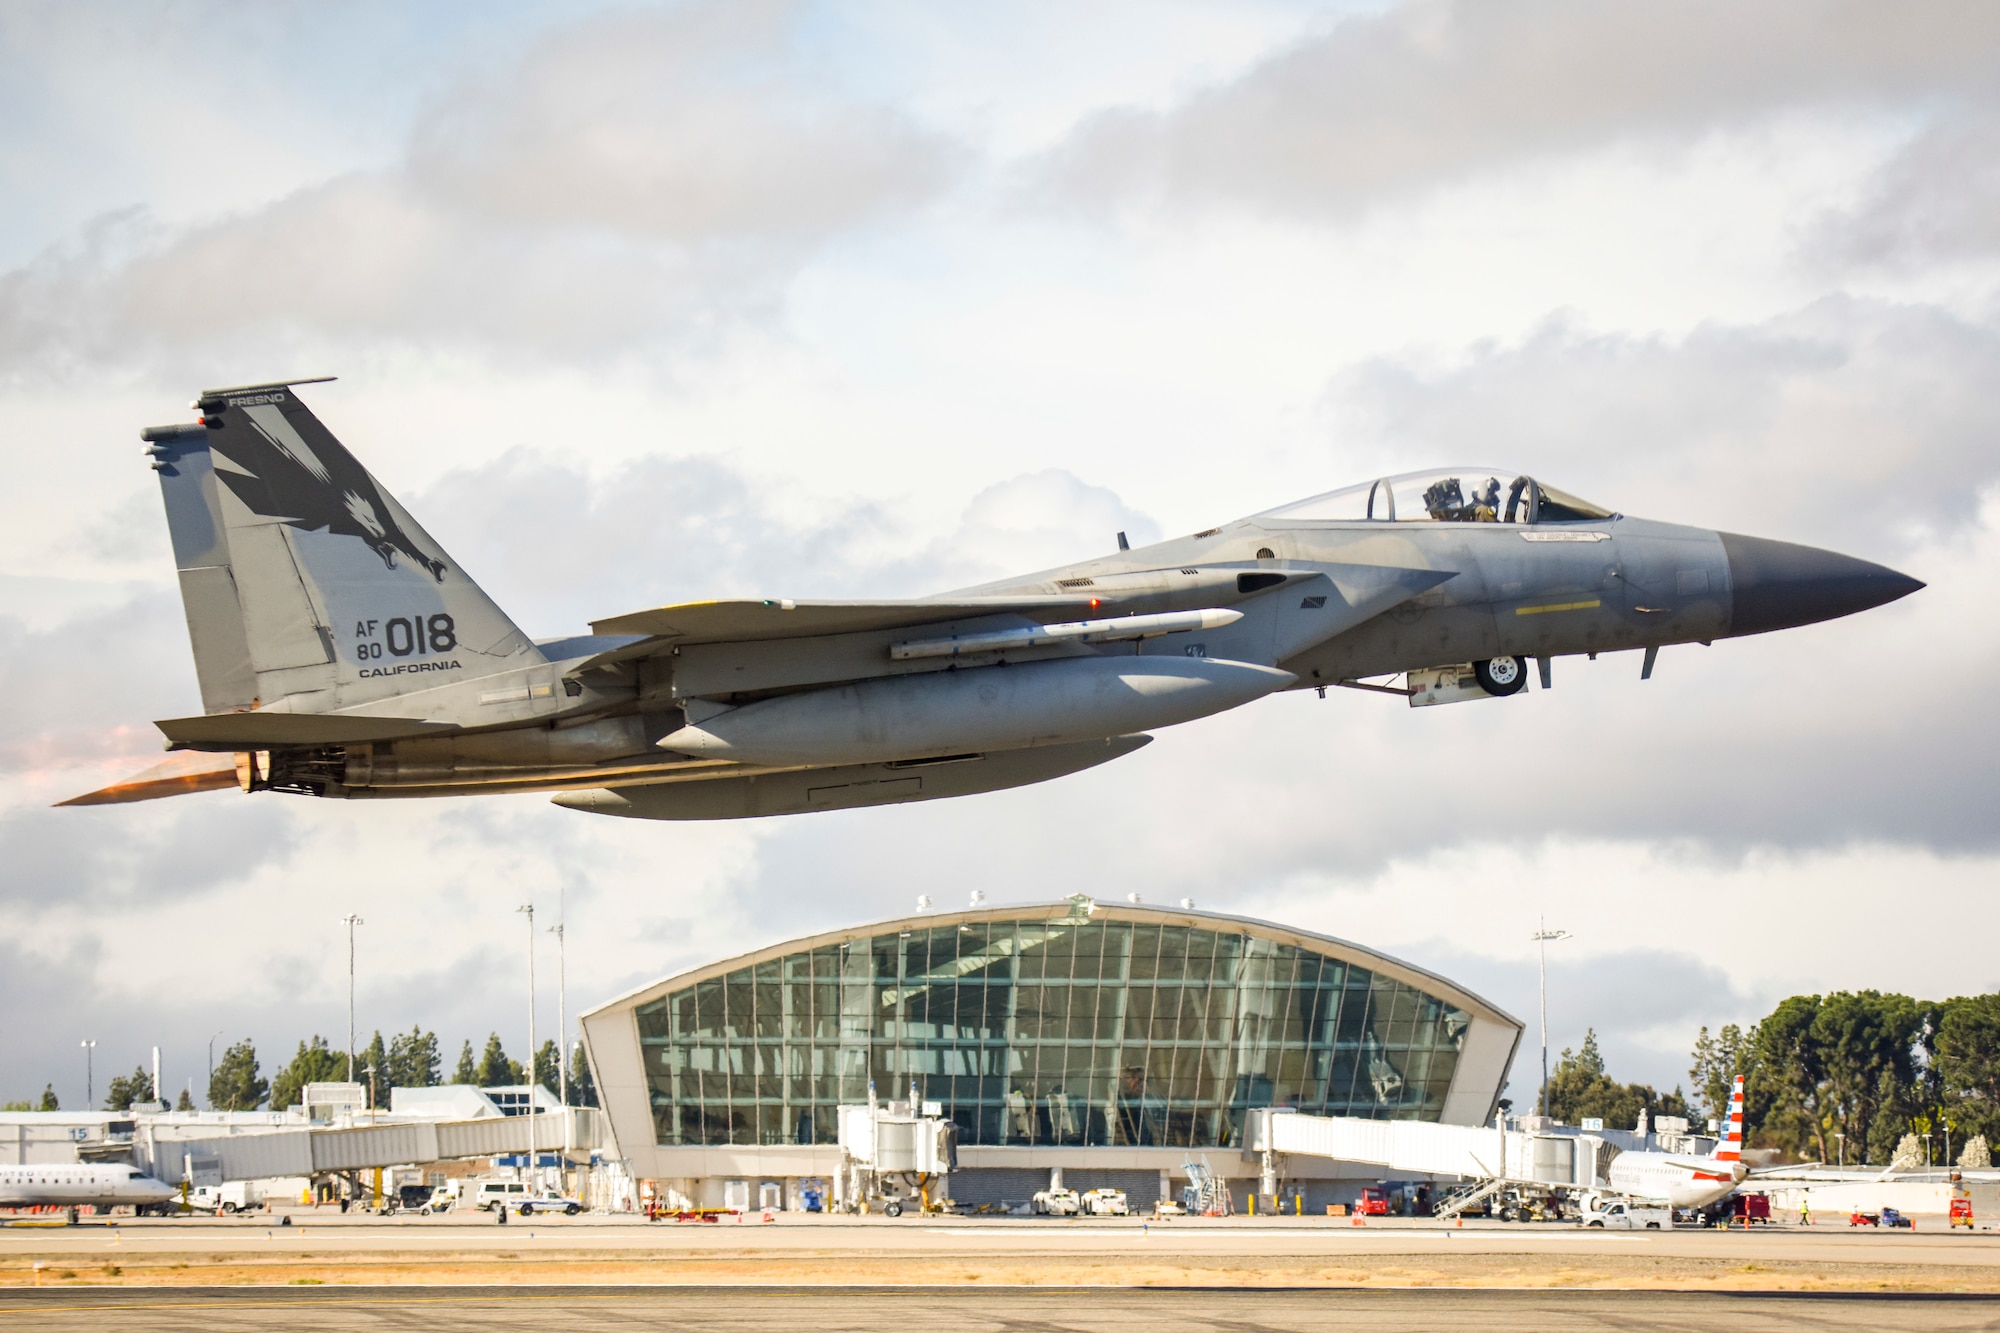 An F-15C Eagle from the 144th Fighter Wing takes off from the Fresno Yosemite International Airport with airport's main terminal in the background, Mar. 17, 2020, to conduct a routine training mission, ensuring pilots maintain required training hours and the Wing maintains mission readiness. (U.S. Air National Guard photo by Capt. Jason Sanchez)